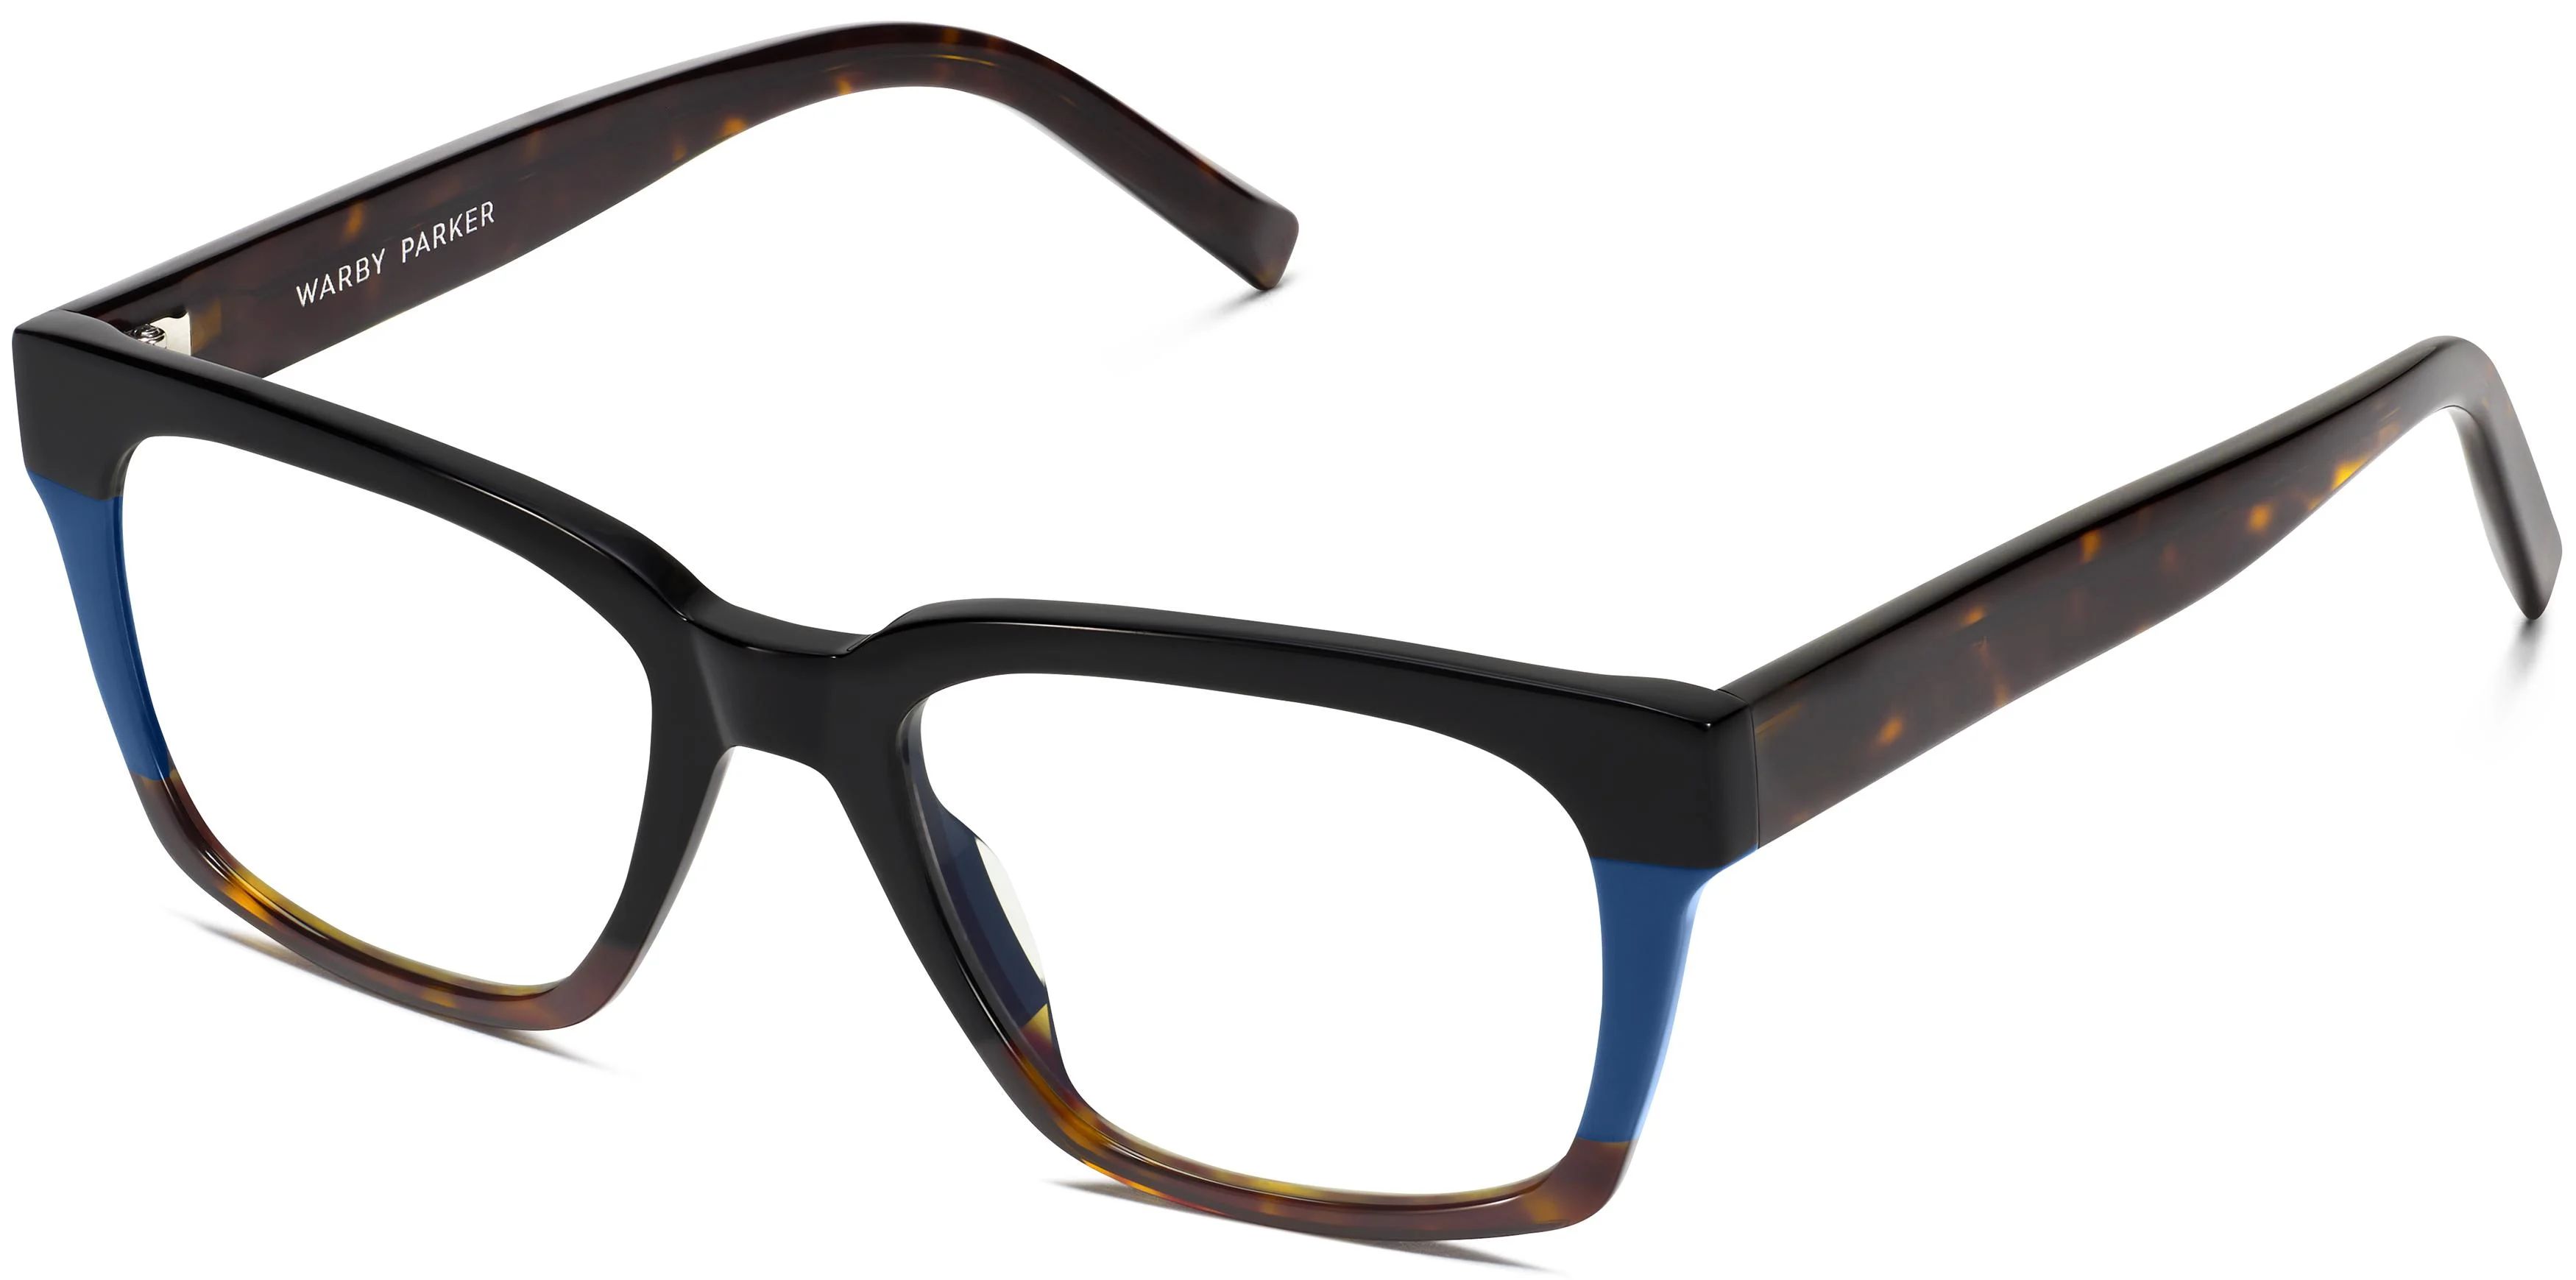 Andre | Warby Parker (US)